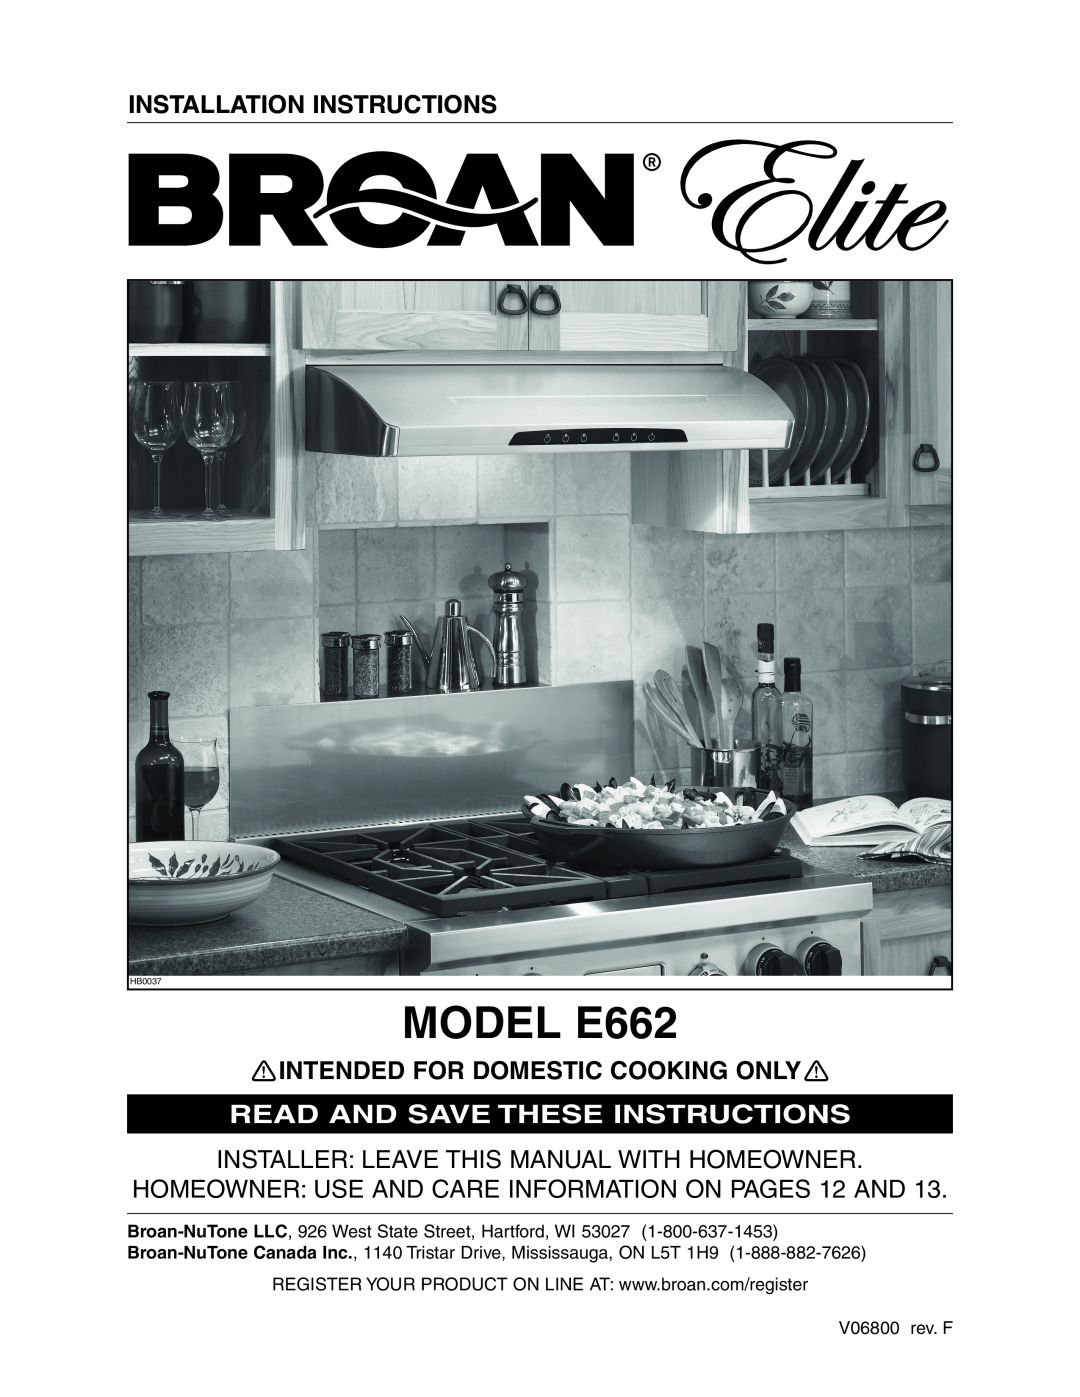 Broan installation instructions MODEL E662, Installation Instructions, Intended For Domestic Cooking Only 